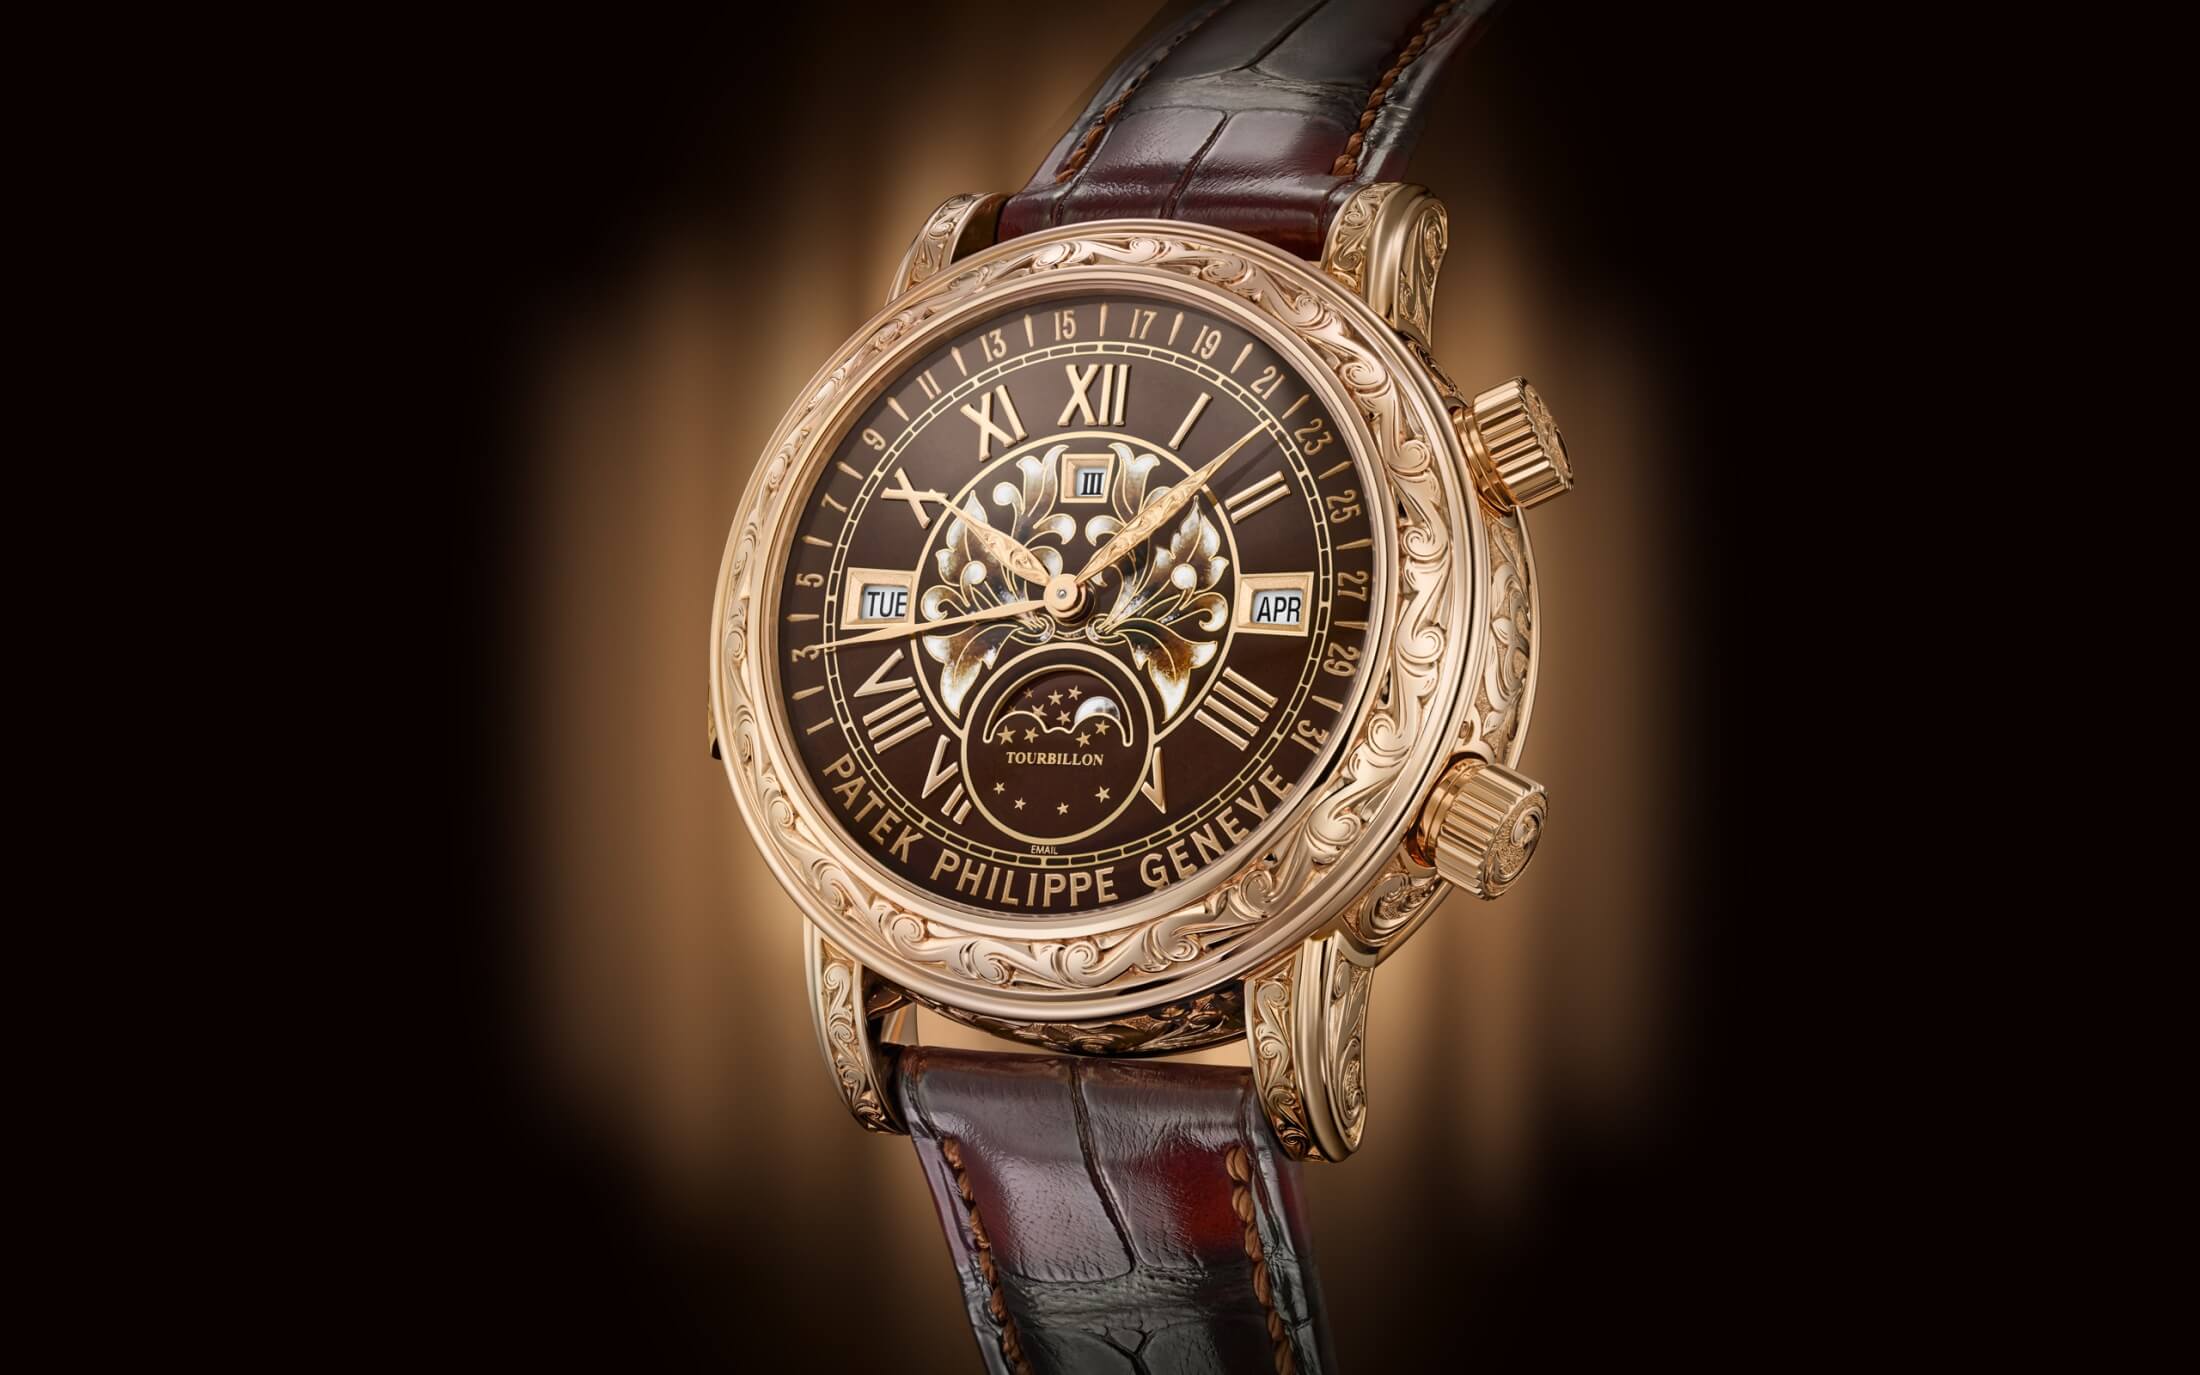 Patek Philippe Grand Complications 6002r 001 At Cortina Watch Featured Image